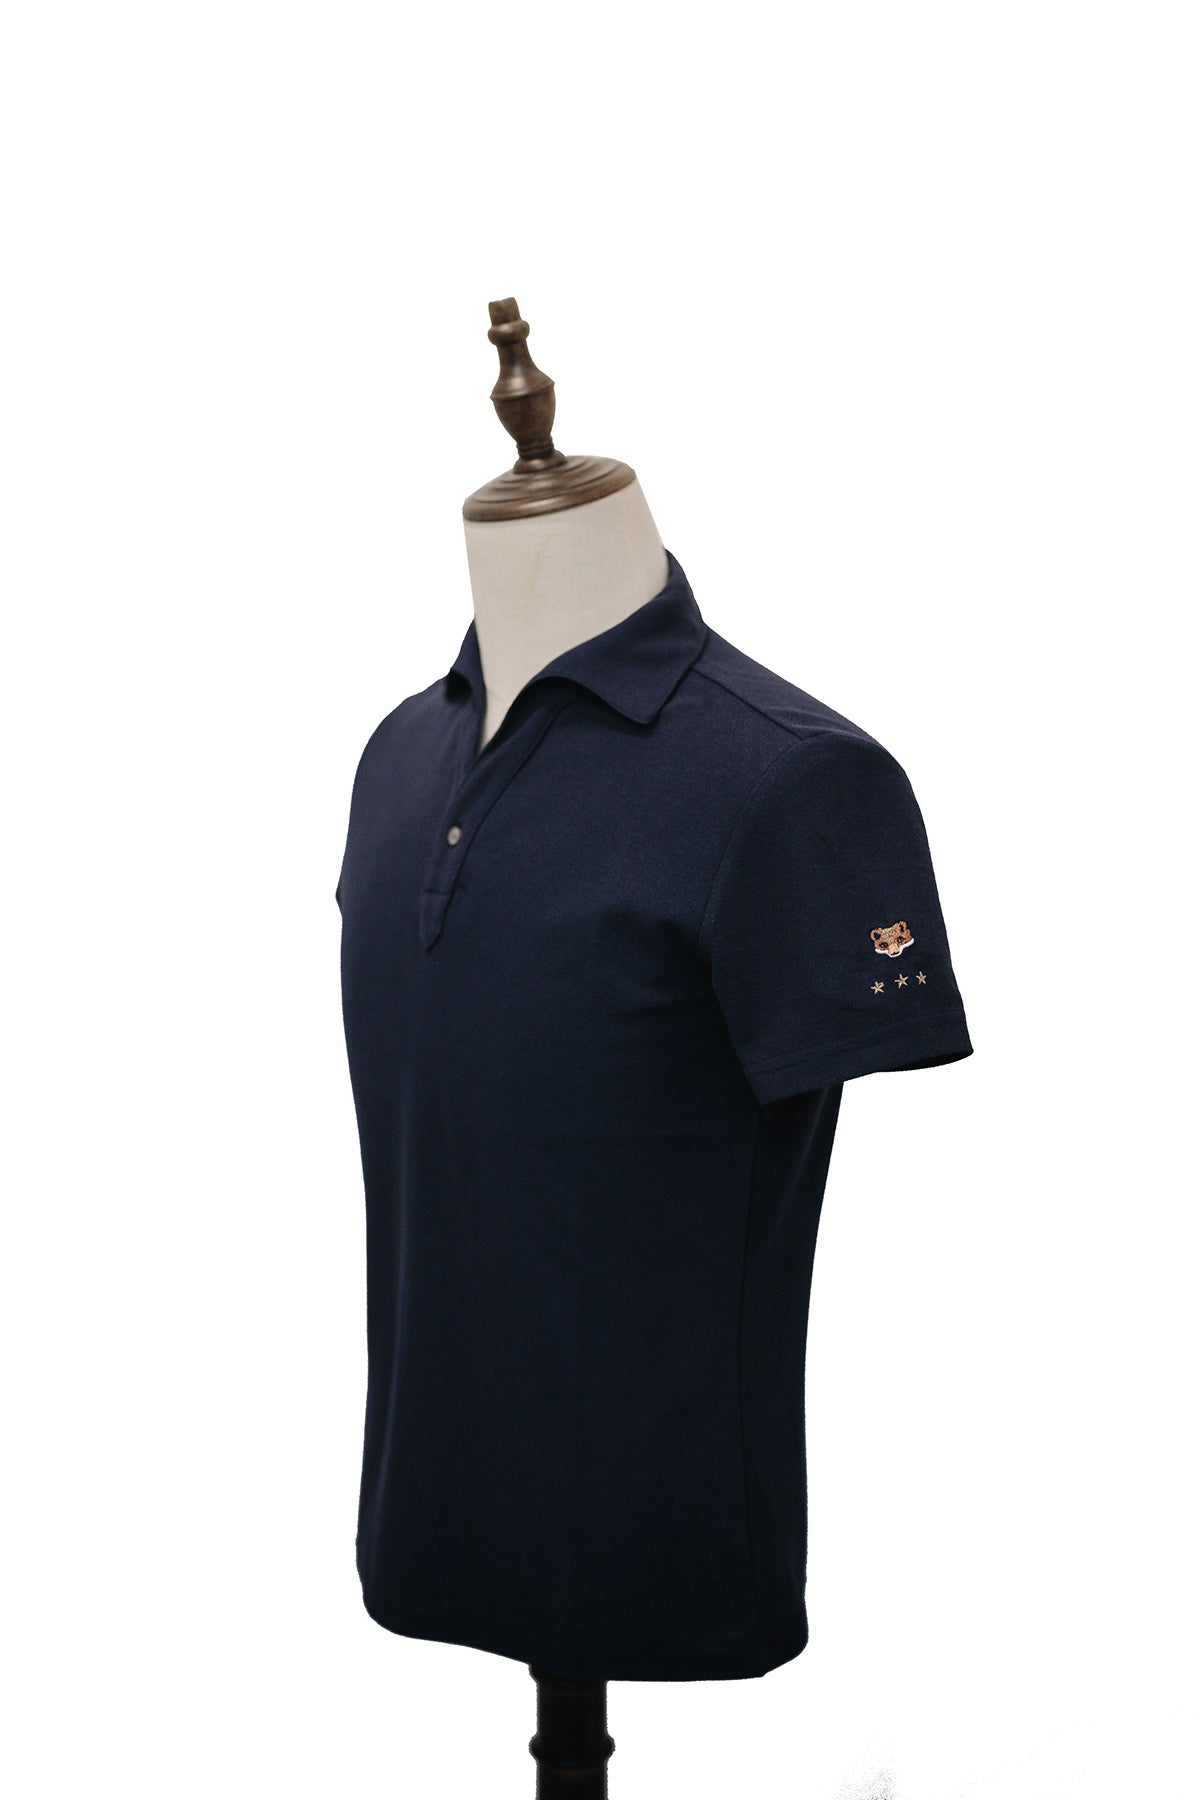 One Piece Collar Polo Tee - Blue - Assemble Singapore